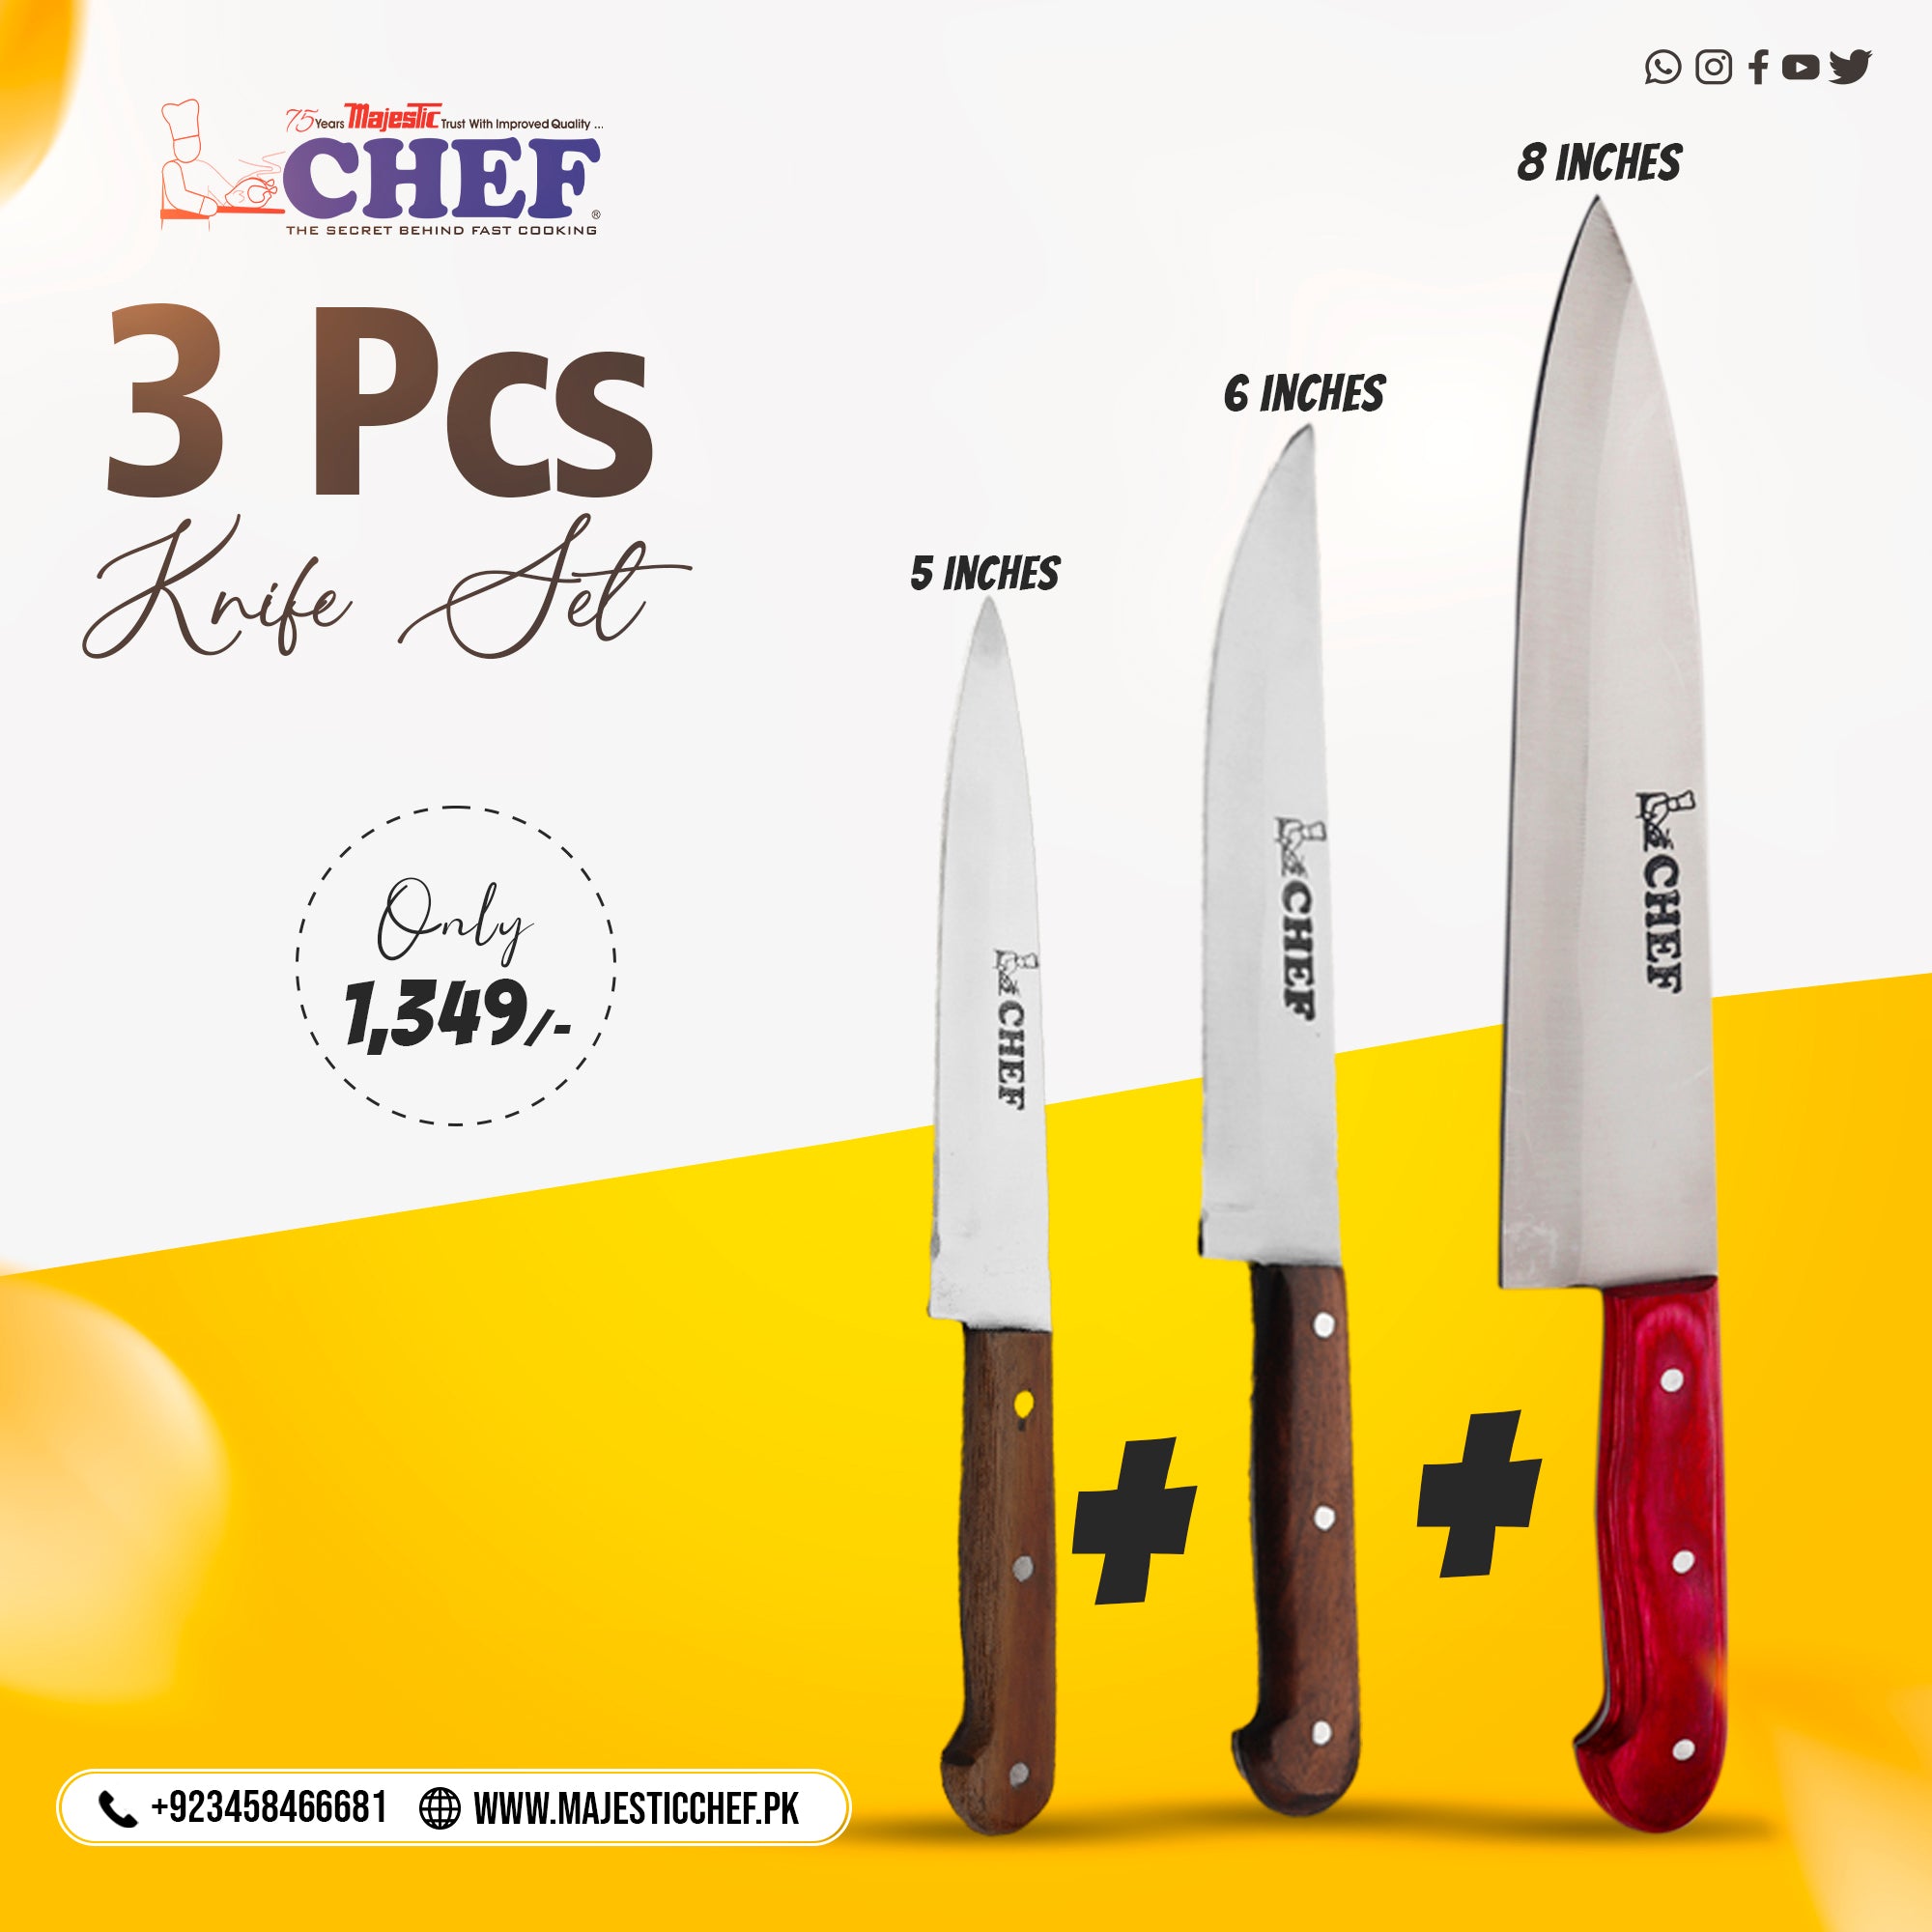 3 Pcs Stainless Steel Chef Knife Set - Combo Deals ( 5,6 inch & Pro knife 8 inch ) WH - best cookware brand in Pakistan